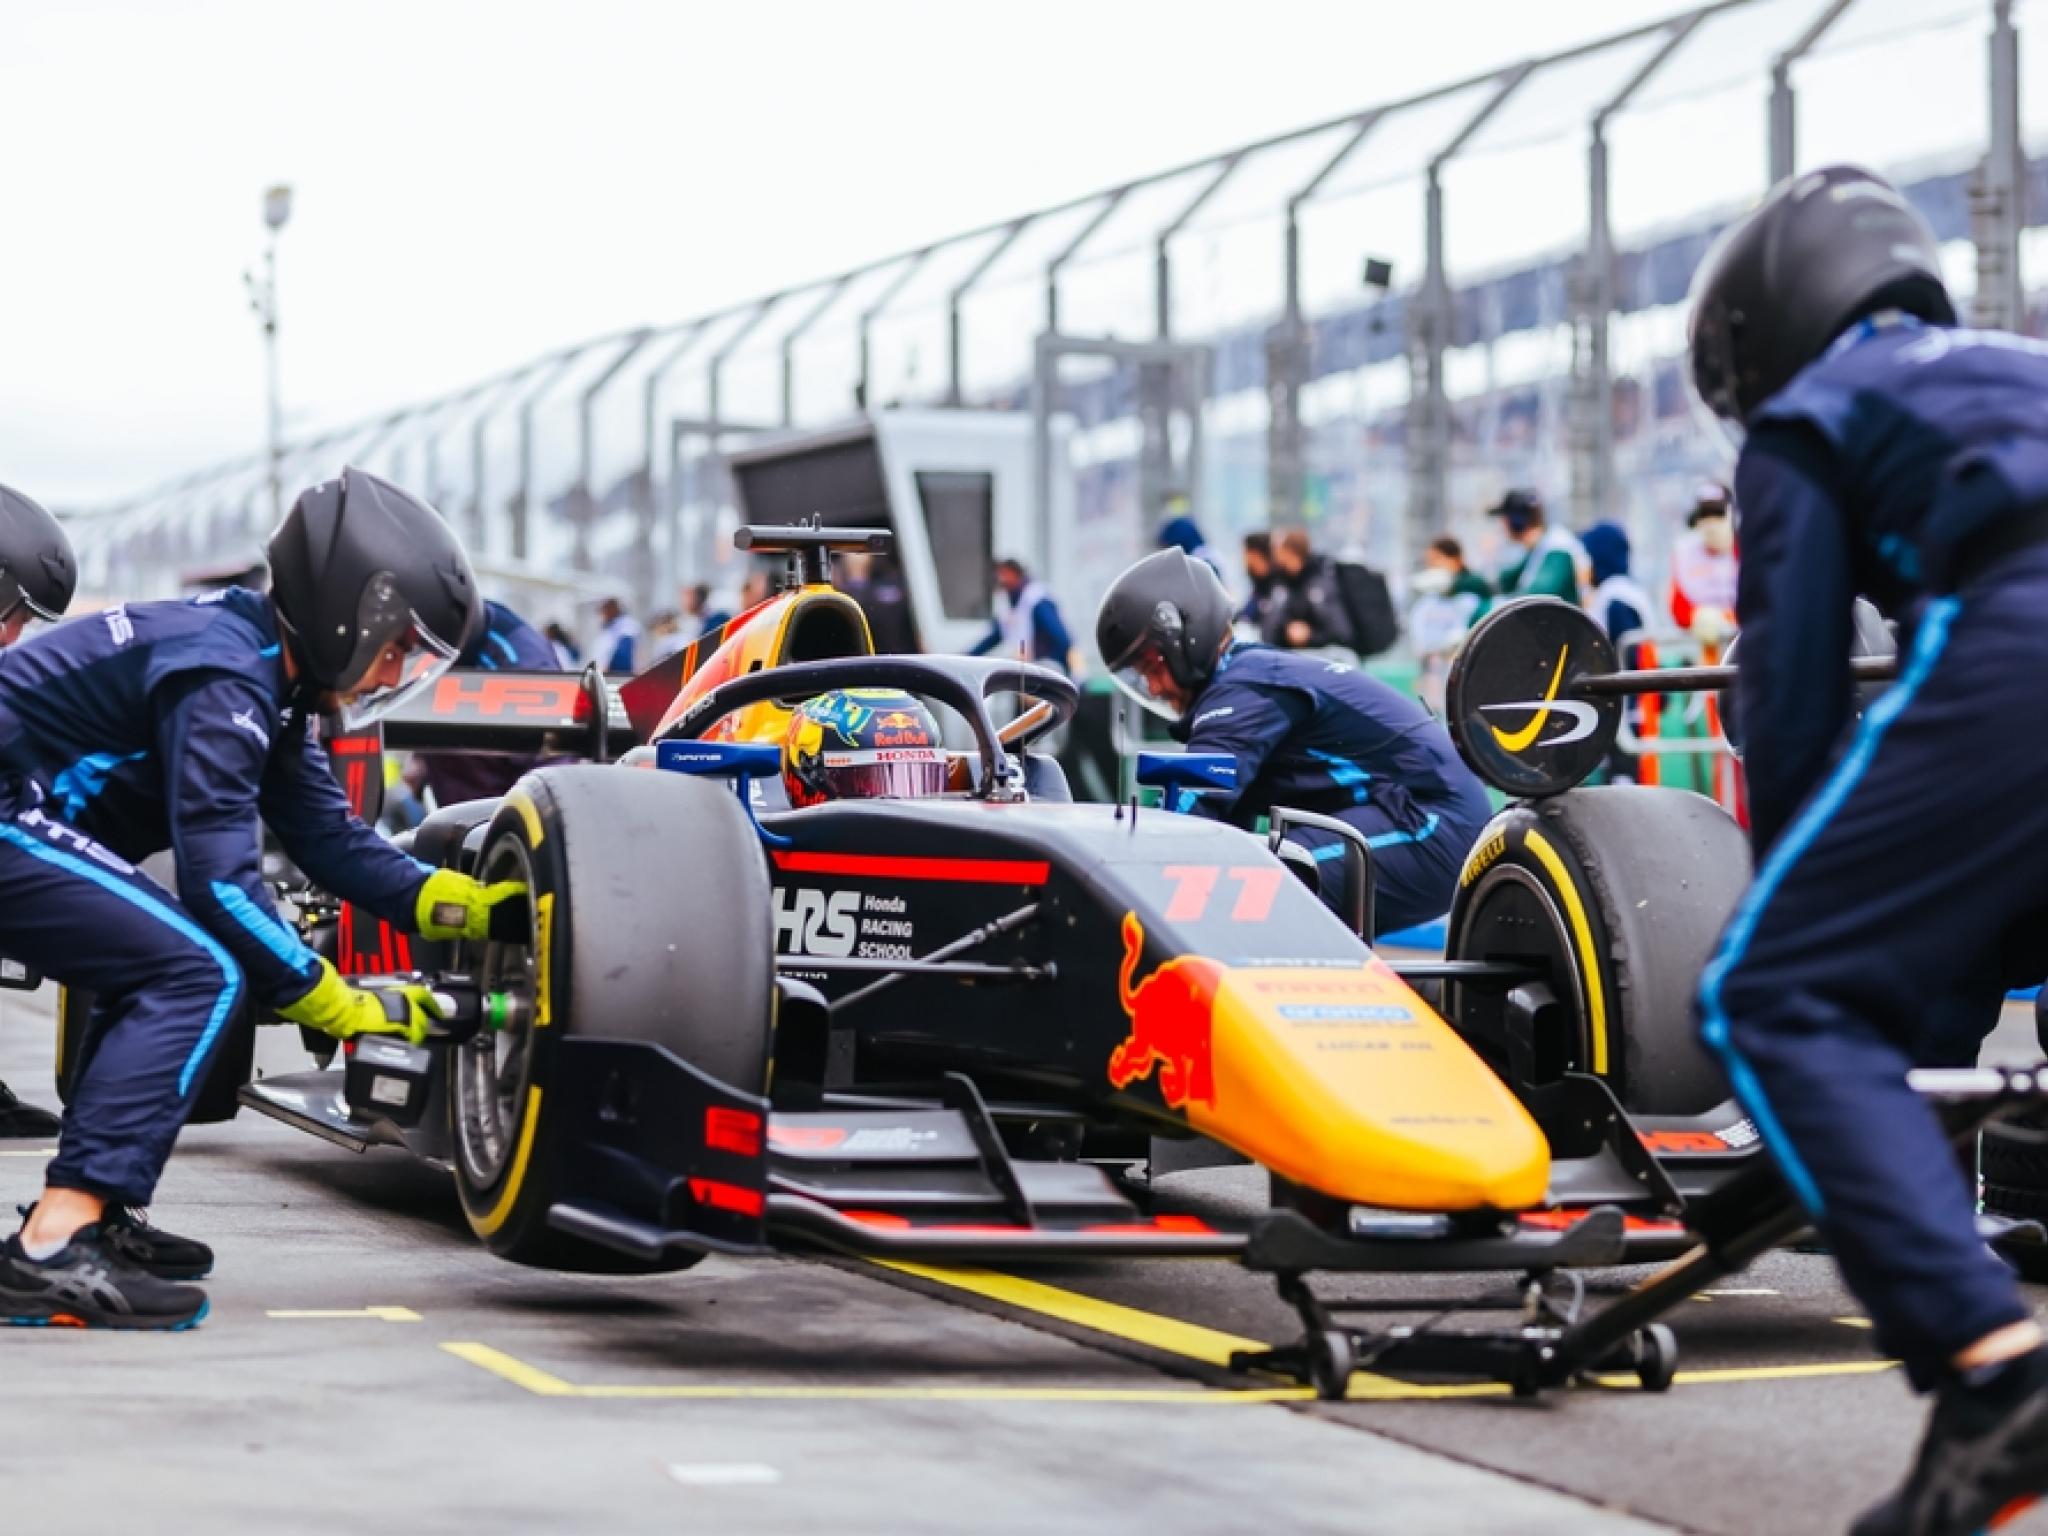  formula-one-rejects-andretti-general-motors-team-bid-what-this-could-mean-for-us-growth-espns-media-rights 